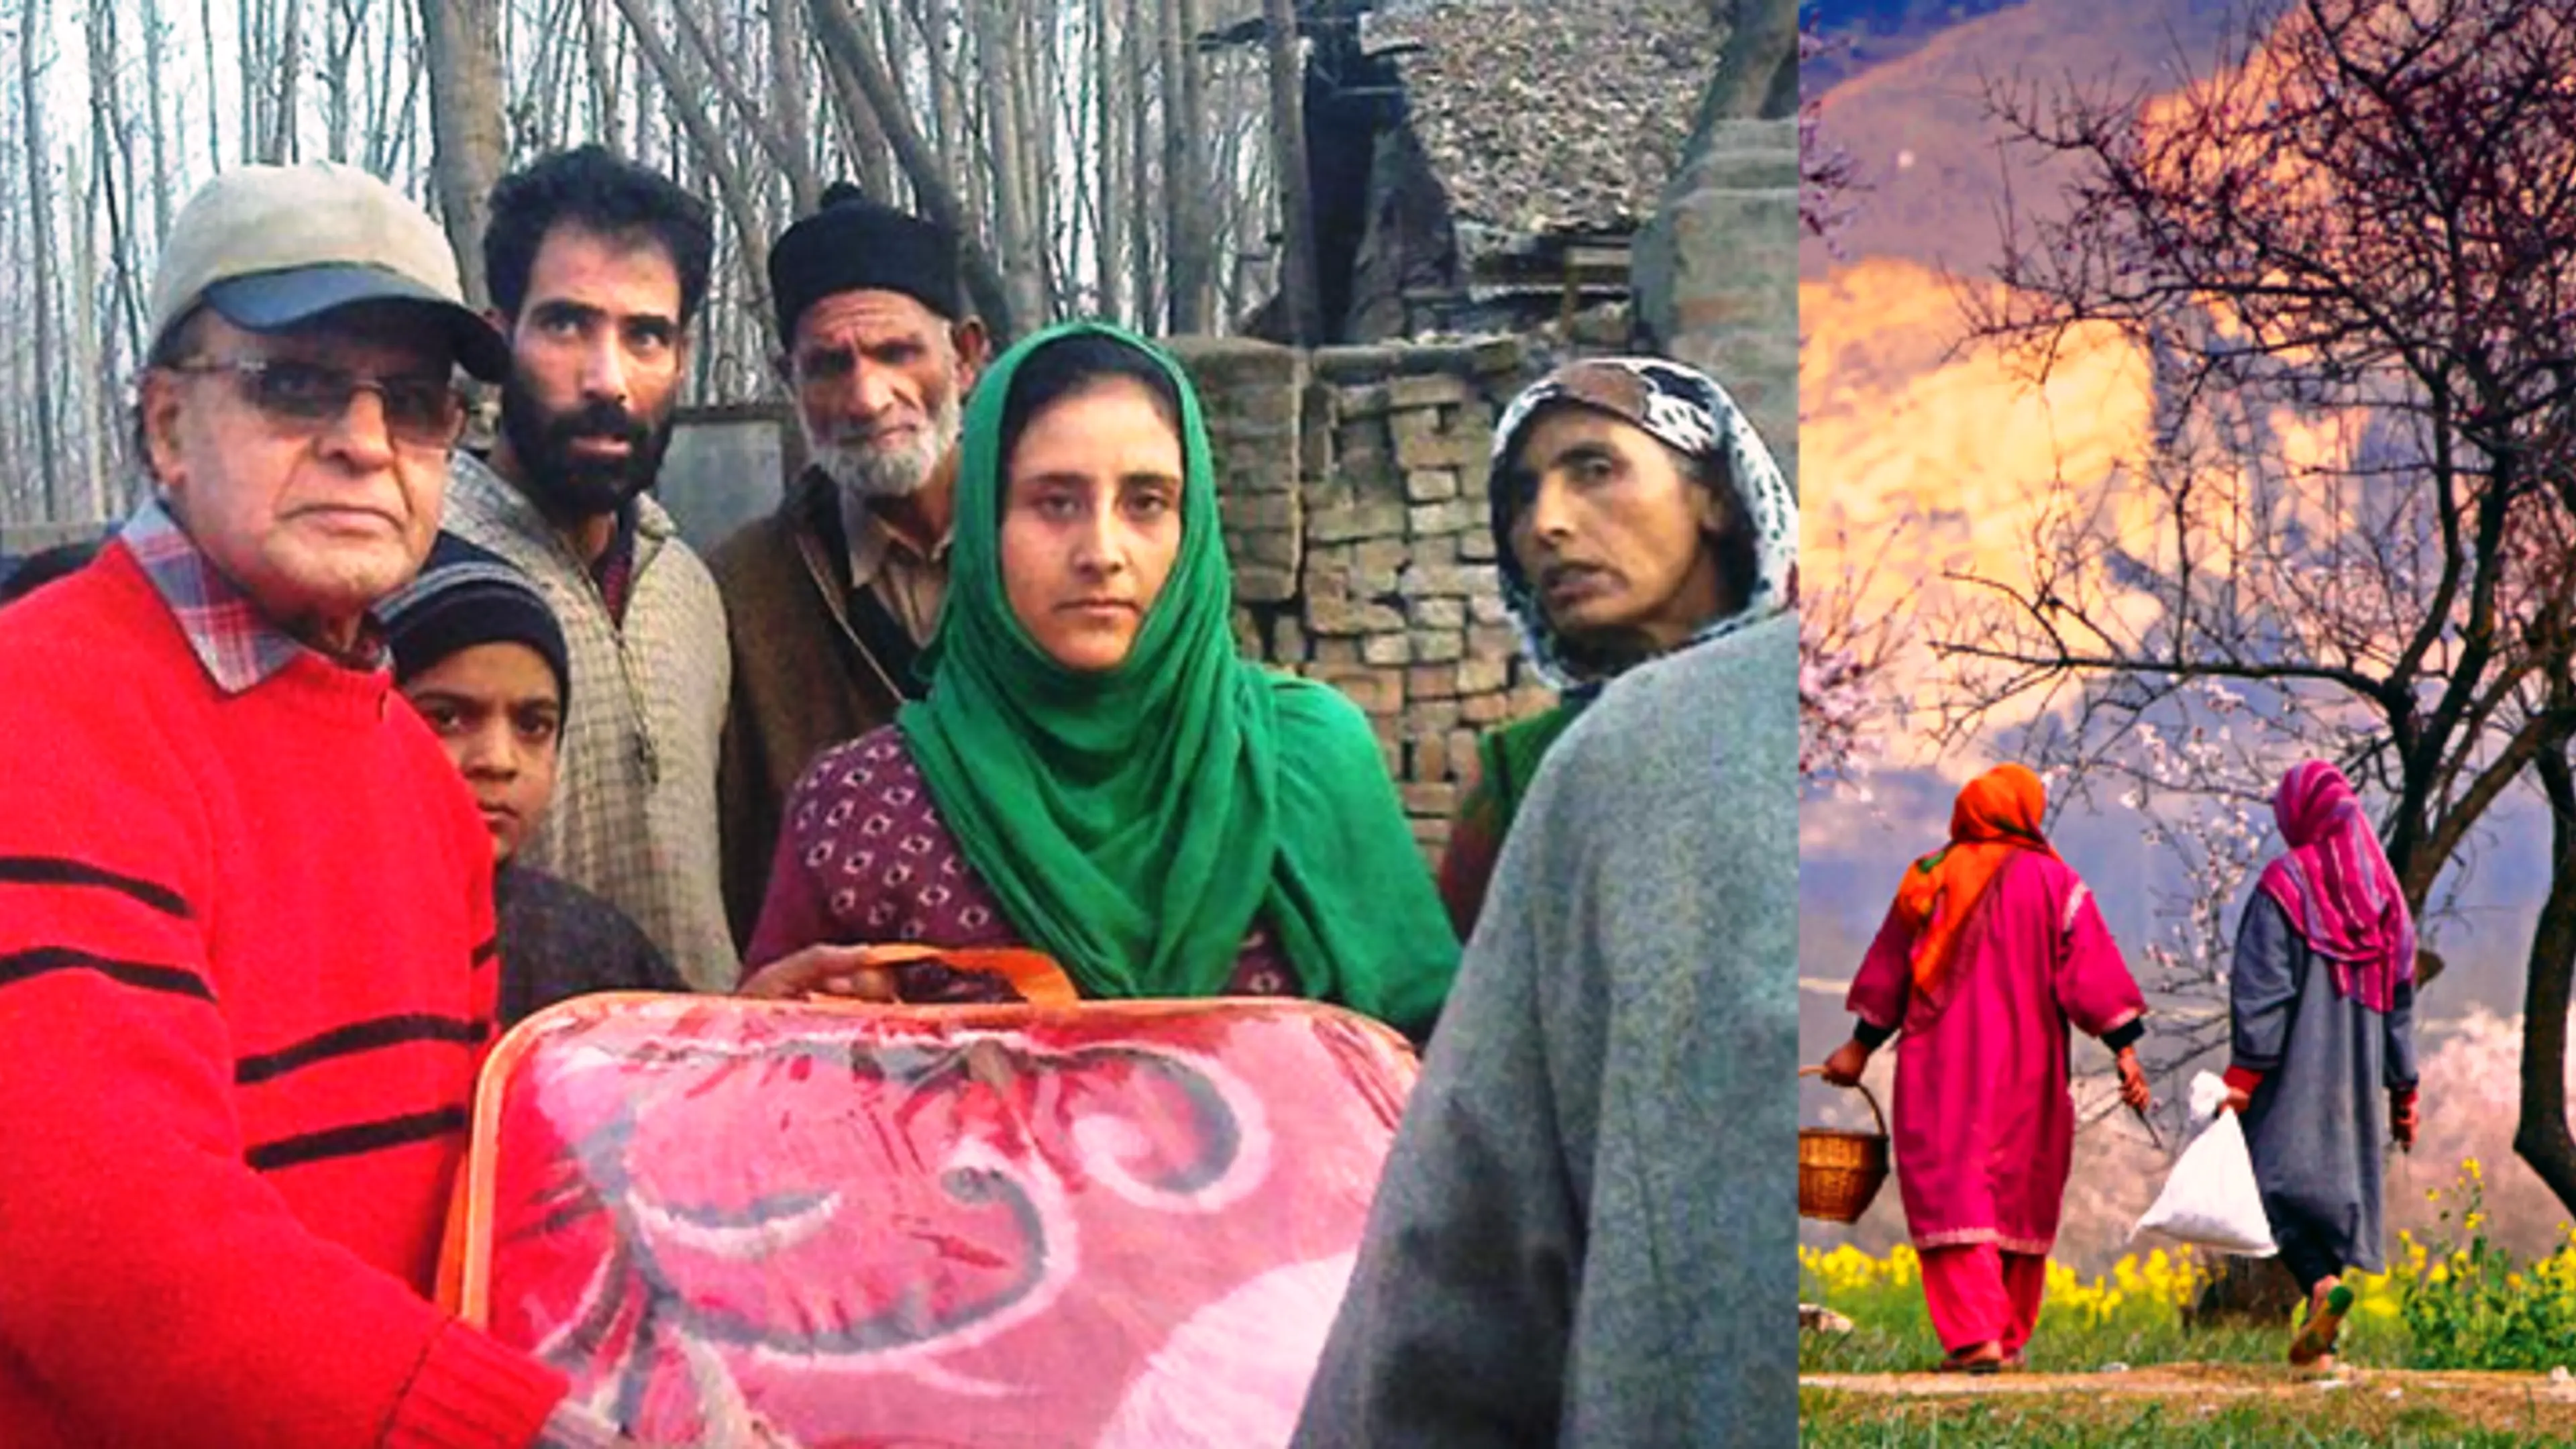 When a Kashmiri Pandit family returned home to make a point